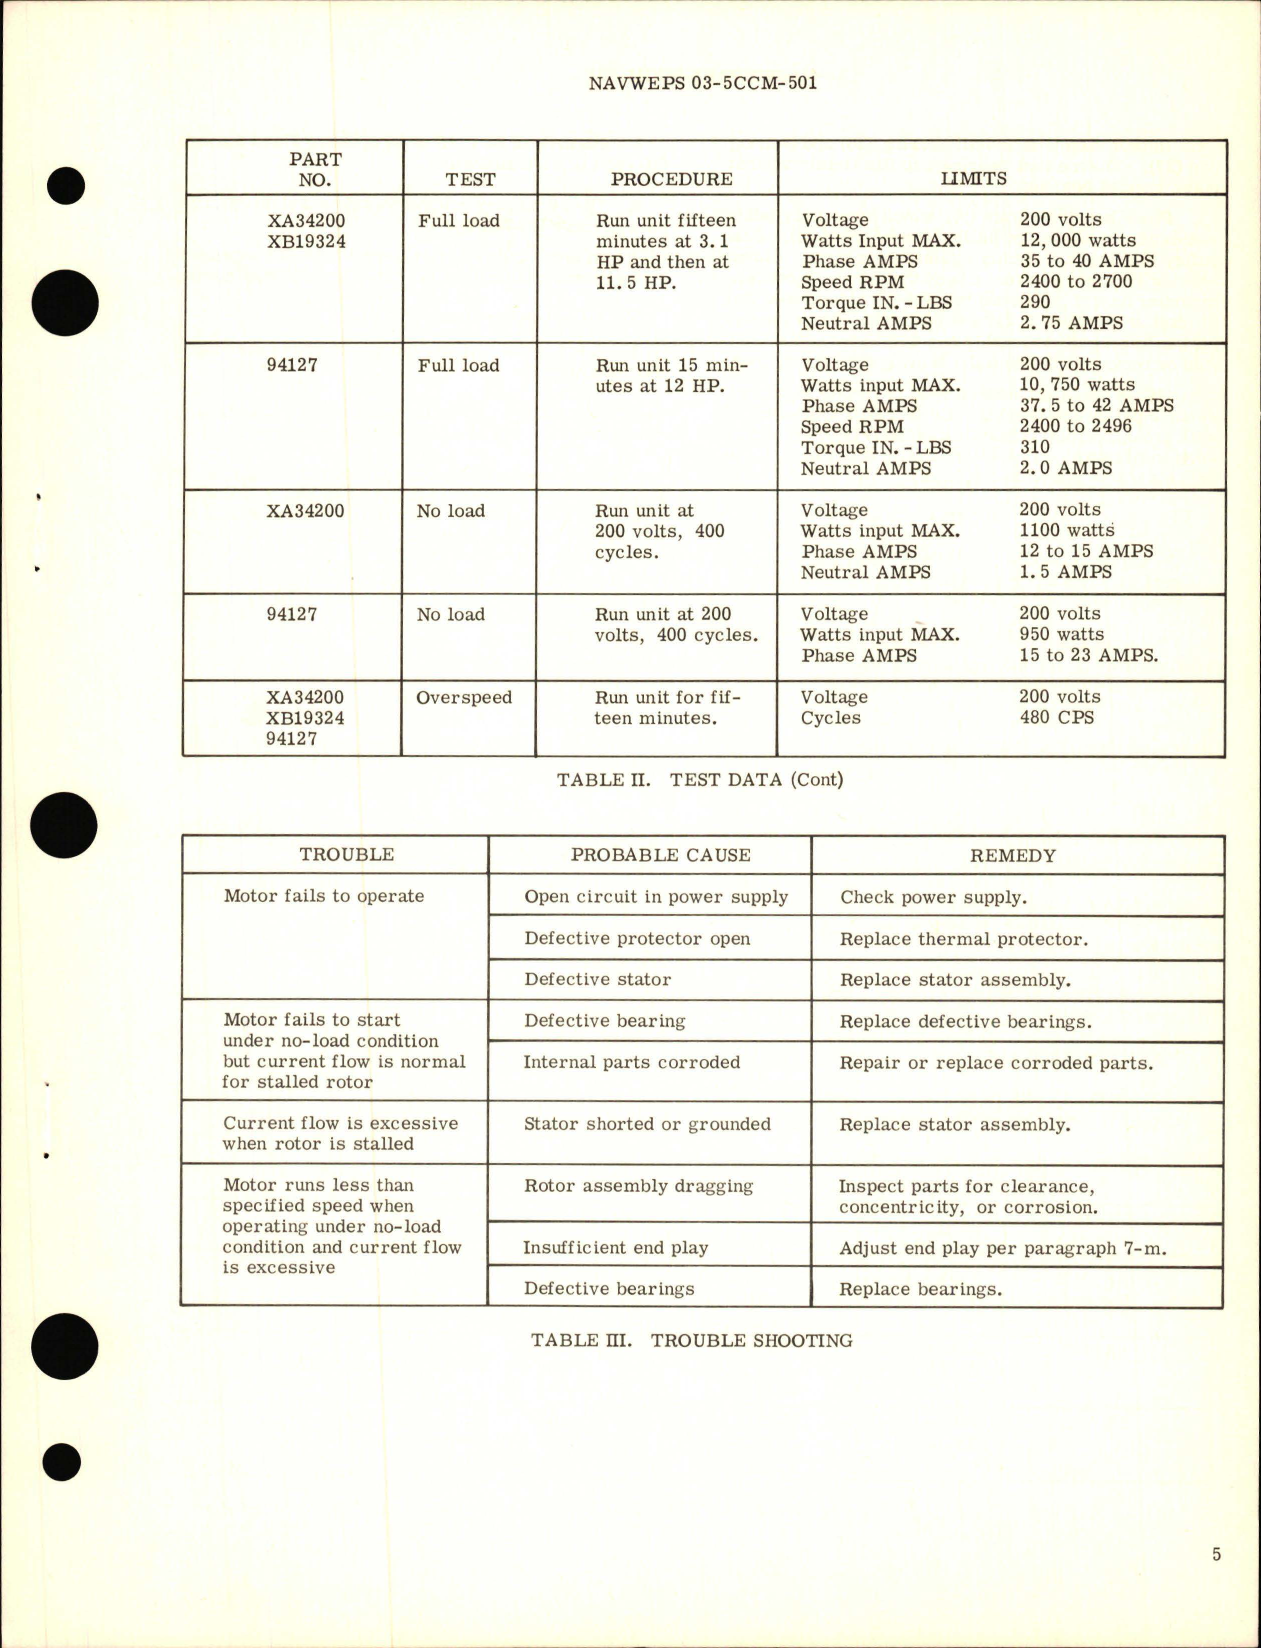 Sample page 5 from AirCorps Library document: Overhaul Instructions with Parts Breakdown for Aircraft Geared Electrical Motors - Part XA34200, XB19324 and 94127